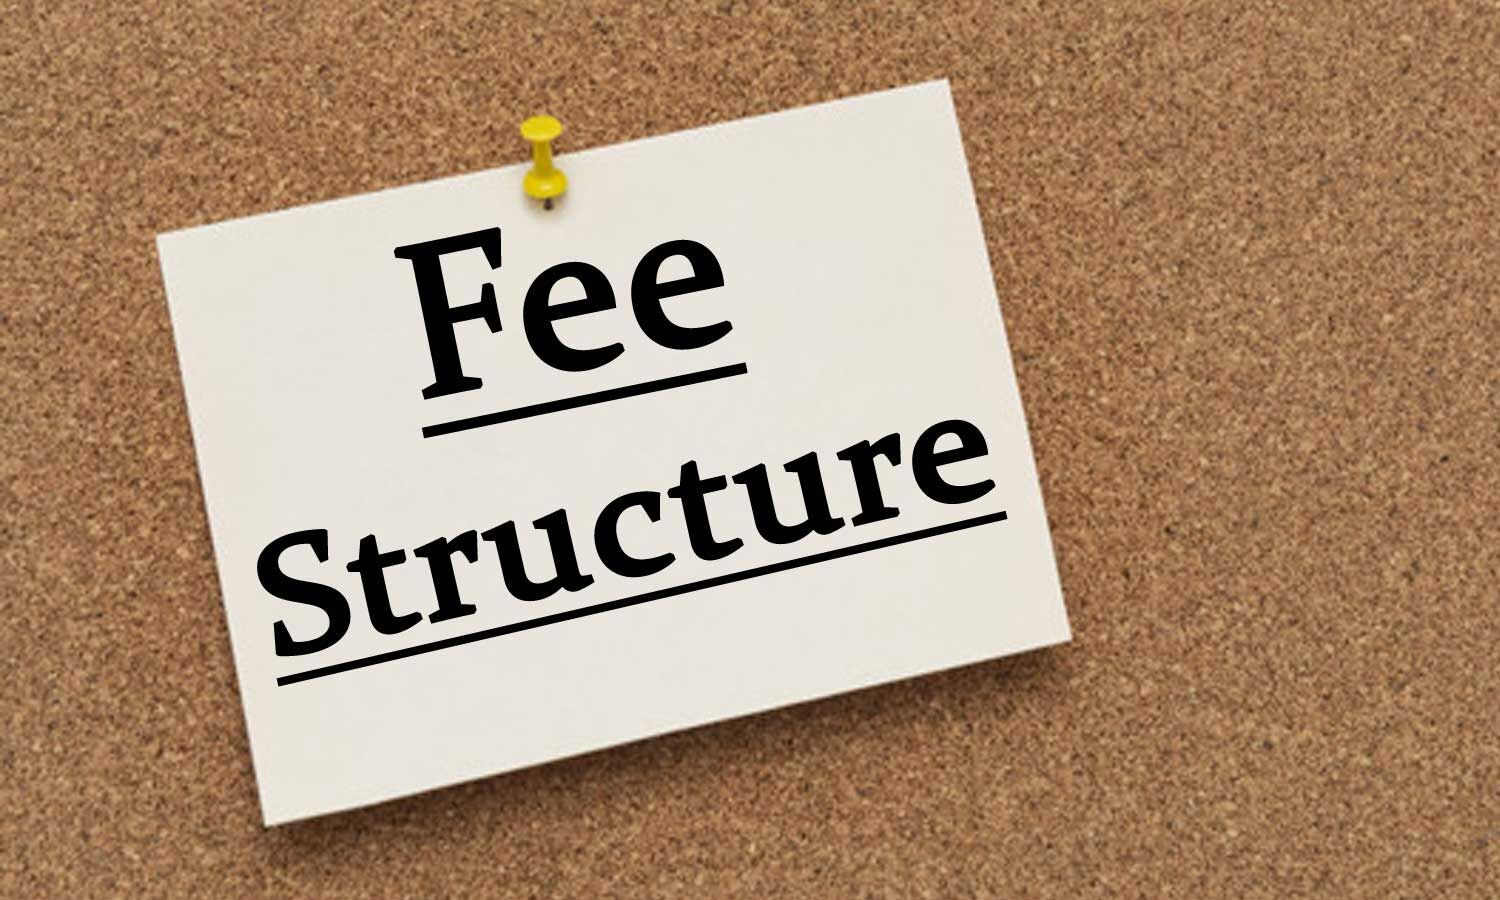 Planning MD, MS, MDS Admissions in Puducherry; Check out Fee Structure